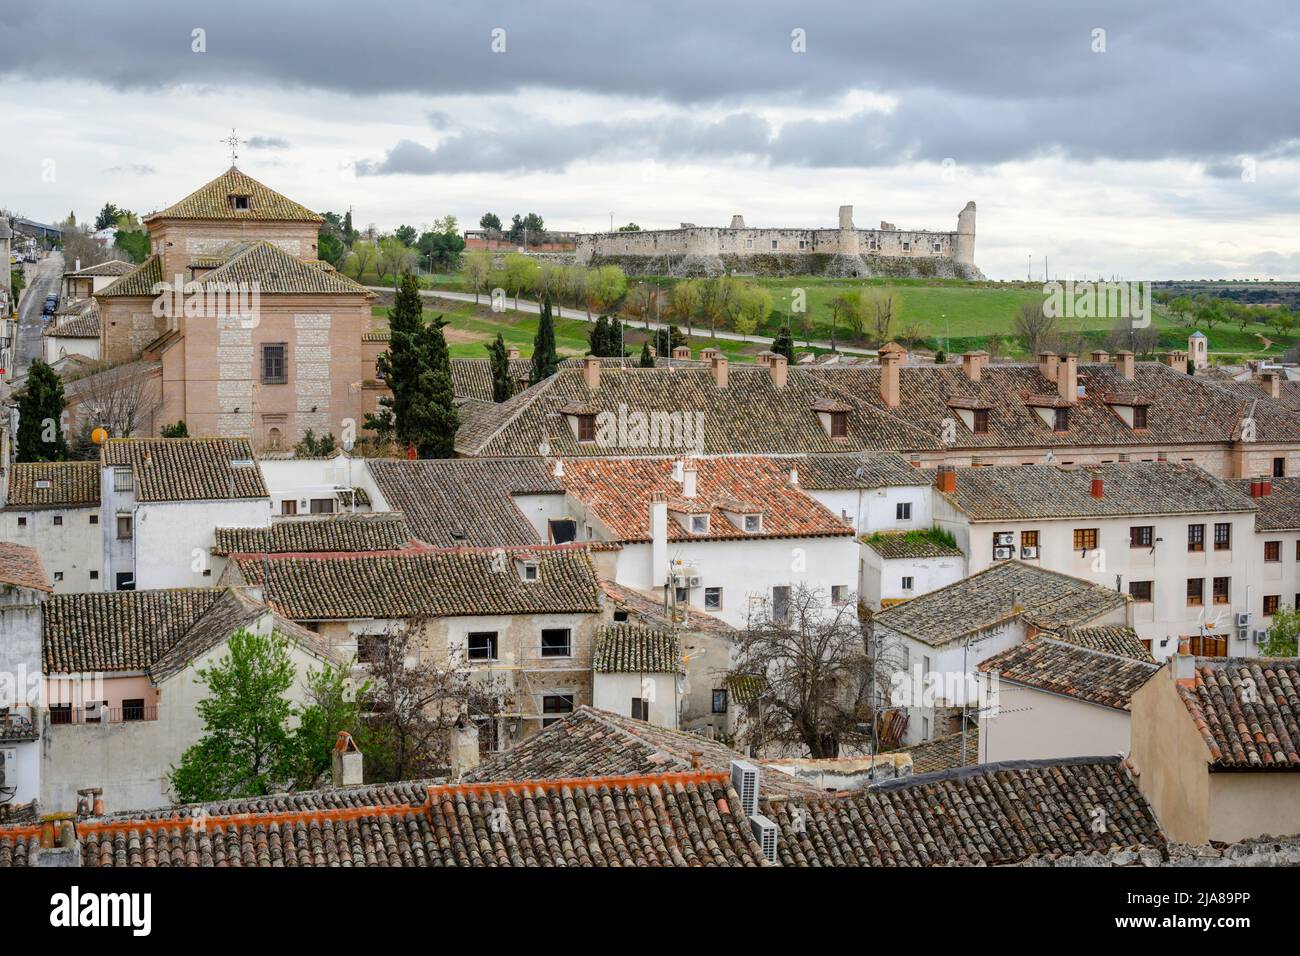 Rooftops and view to the castle in the town of Chinchon, Madrid, Spain. Stock Photo